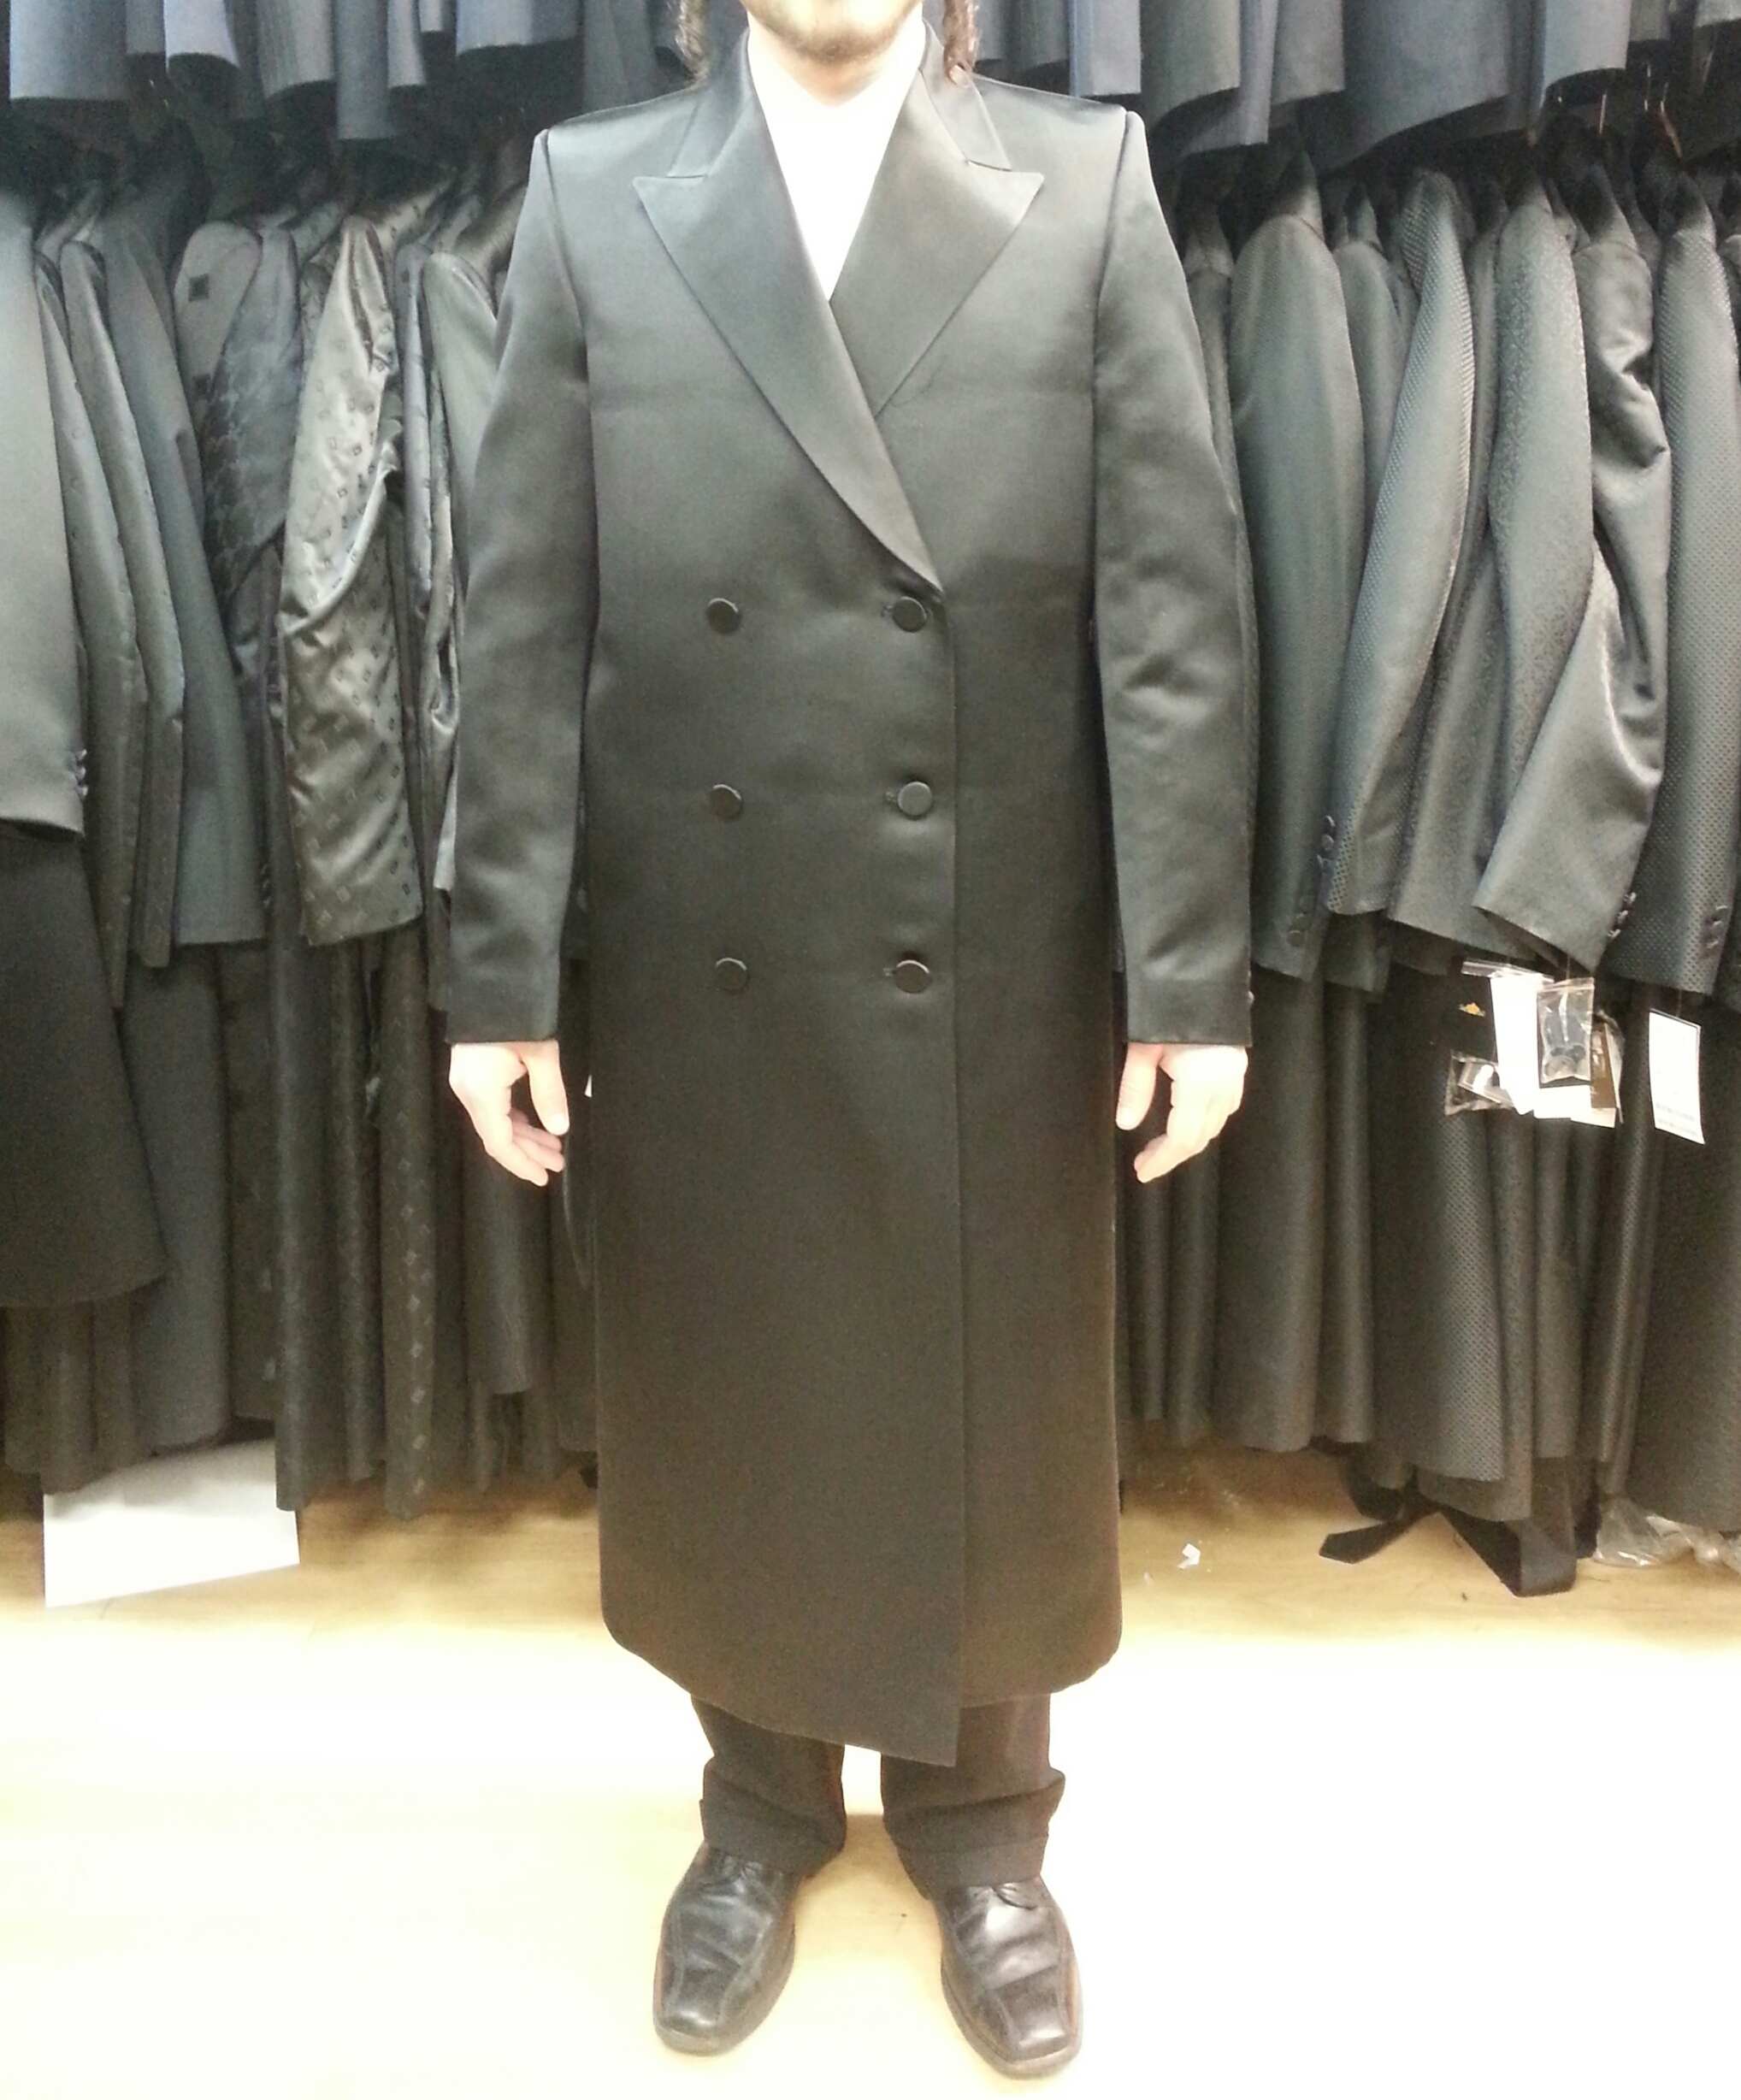 Royal Clothing We Design Manufacture Quality Hassidic